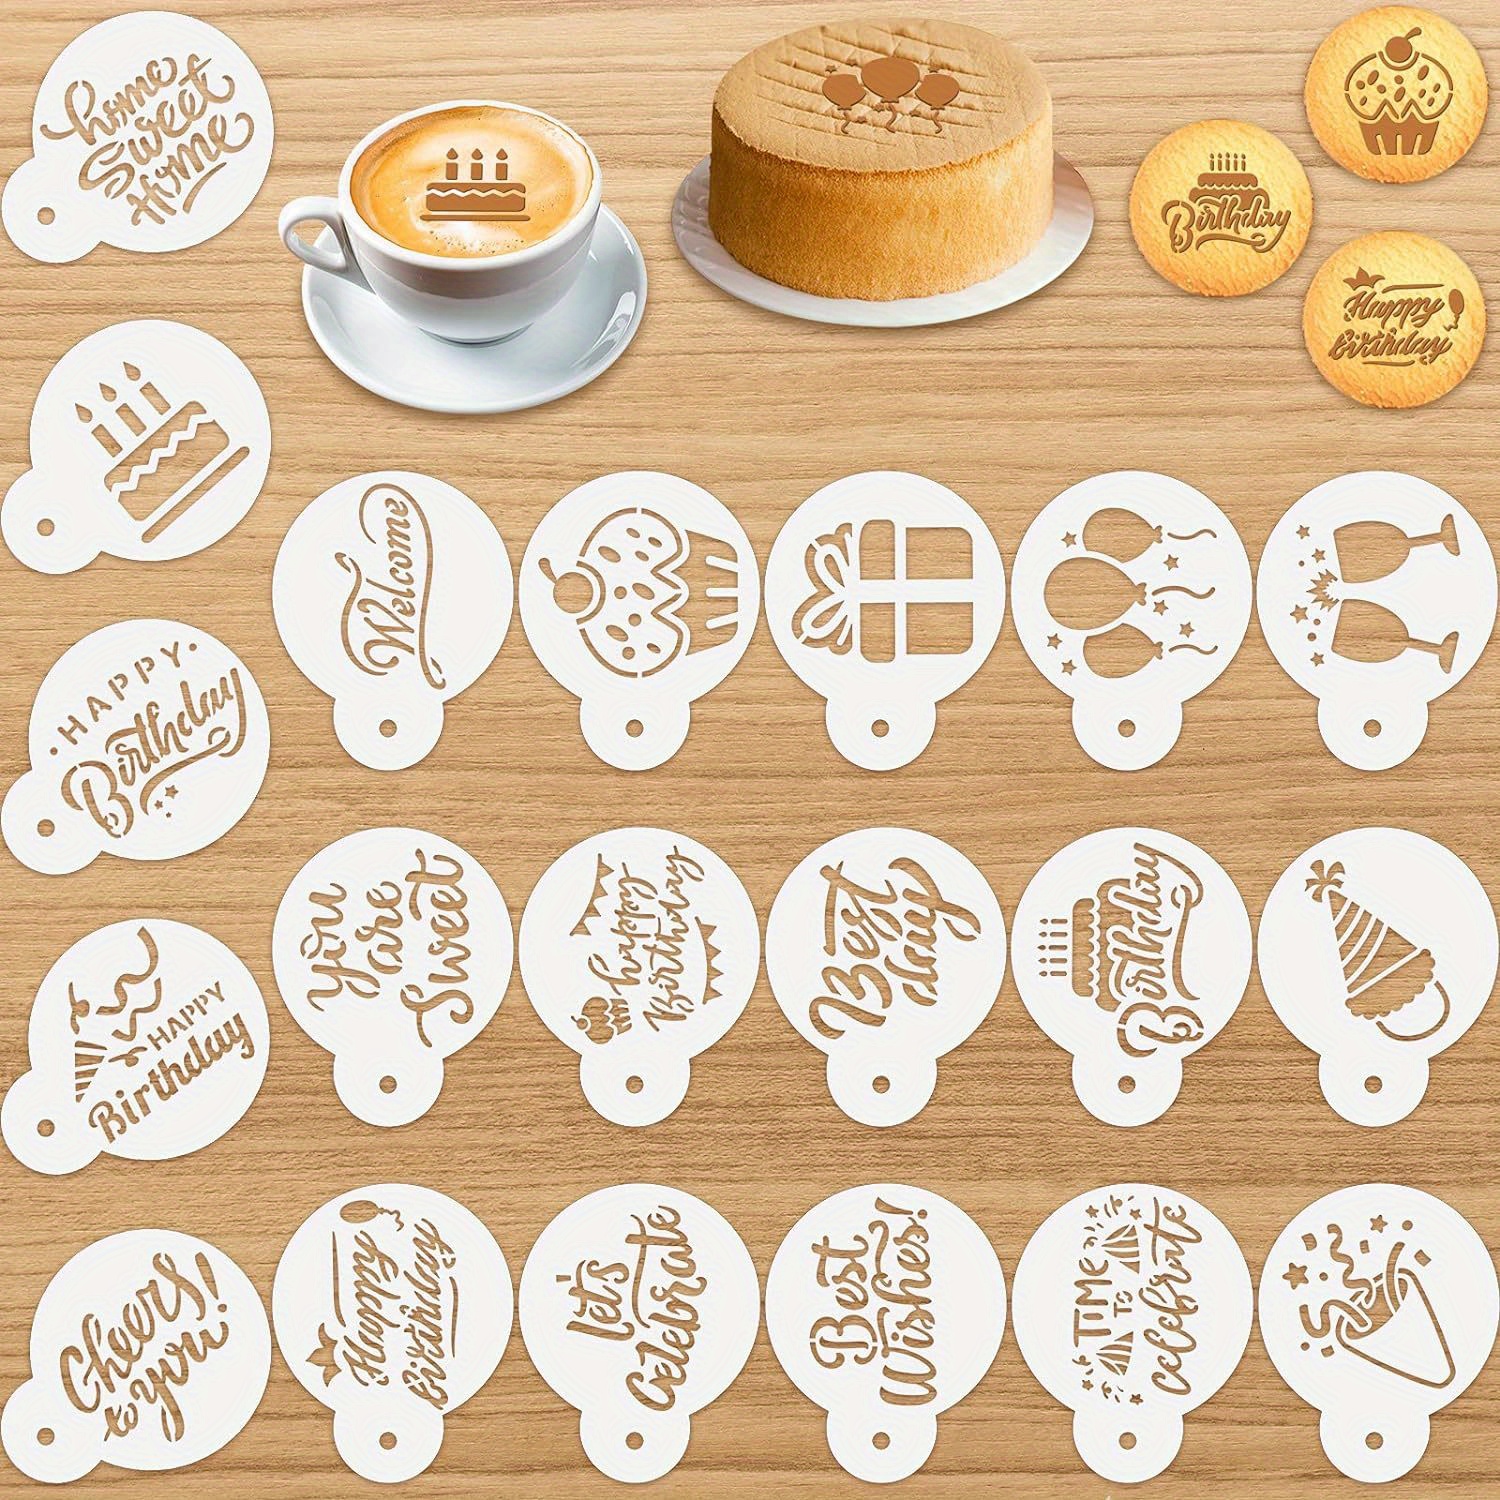  5.5''x5.5'' Cookie Stencil for Airbrushing,Royal Icing Stencils  for Stencil Genie, Plaid Cookie Stencil,Mother's Day Cookie Stencils,Wedding  Cookie Stencils (Love Stencils) : Home & Kitchen